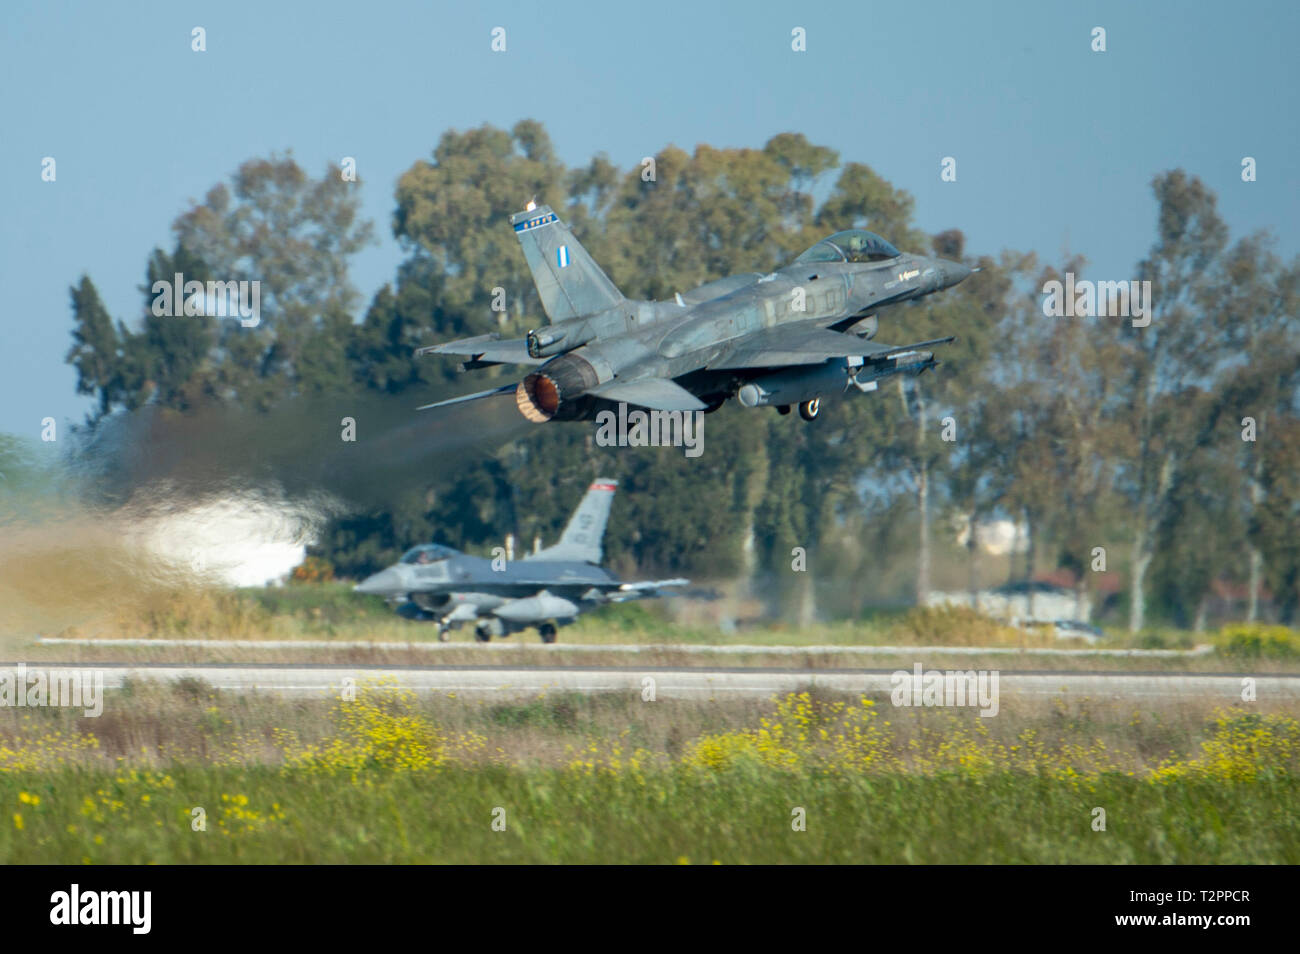 A Greek air force F-16 takes off during exercise INIOCHOS 19 at Andravida Air Base, Greece, April 2, 2019.The exercise provides a chance for Airmen and aircraft of the 480th Expeditionary Fighter Squadron to work alongside allied air forces and better cooperate to accomplish their mission.  (U.S. Air Force photo by Airman 1st Class Branden Rae) Stock Photo